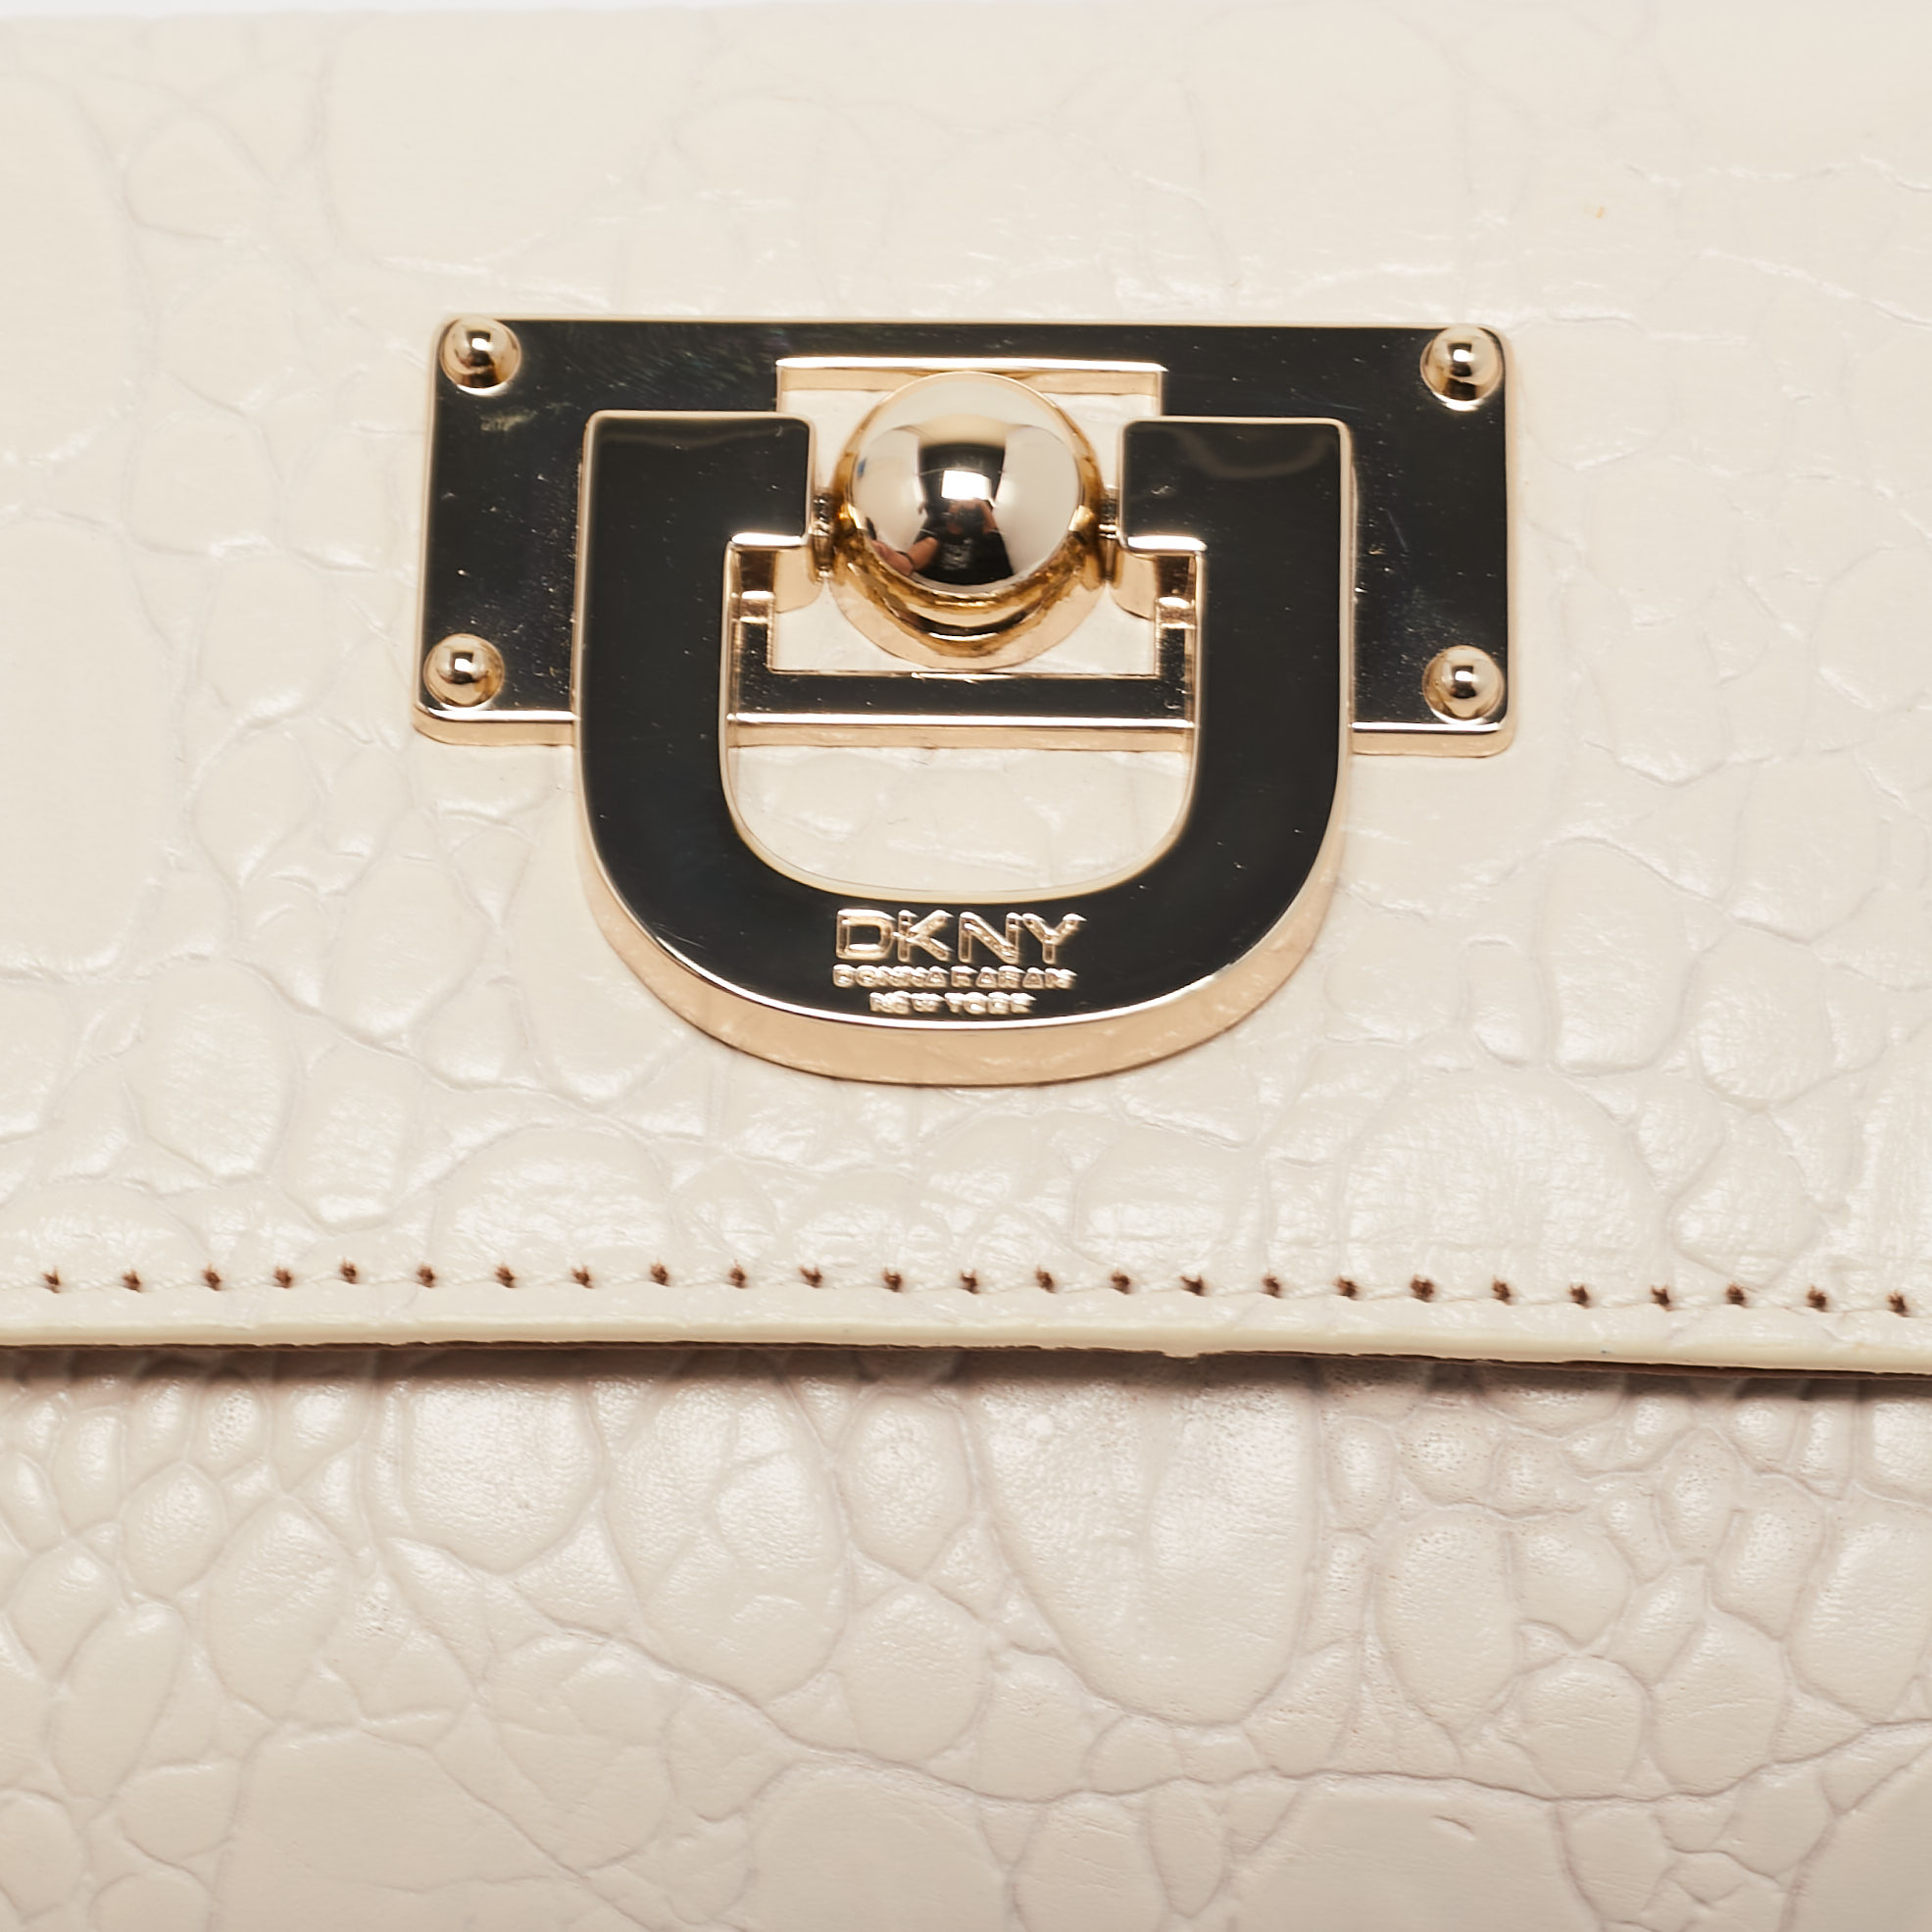 Dkny Off White Croc Embossed Leather Flap Continental Wallet